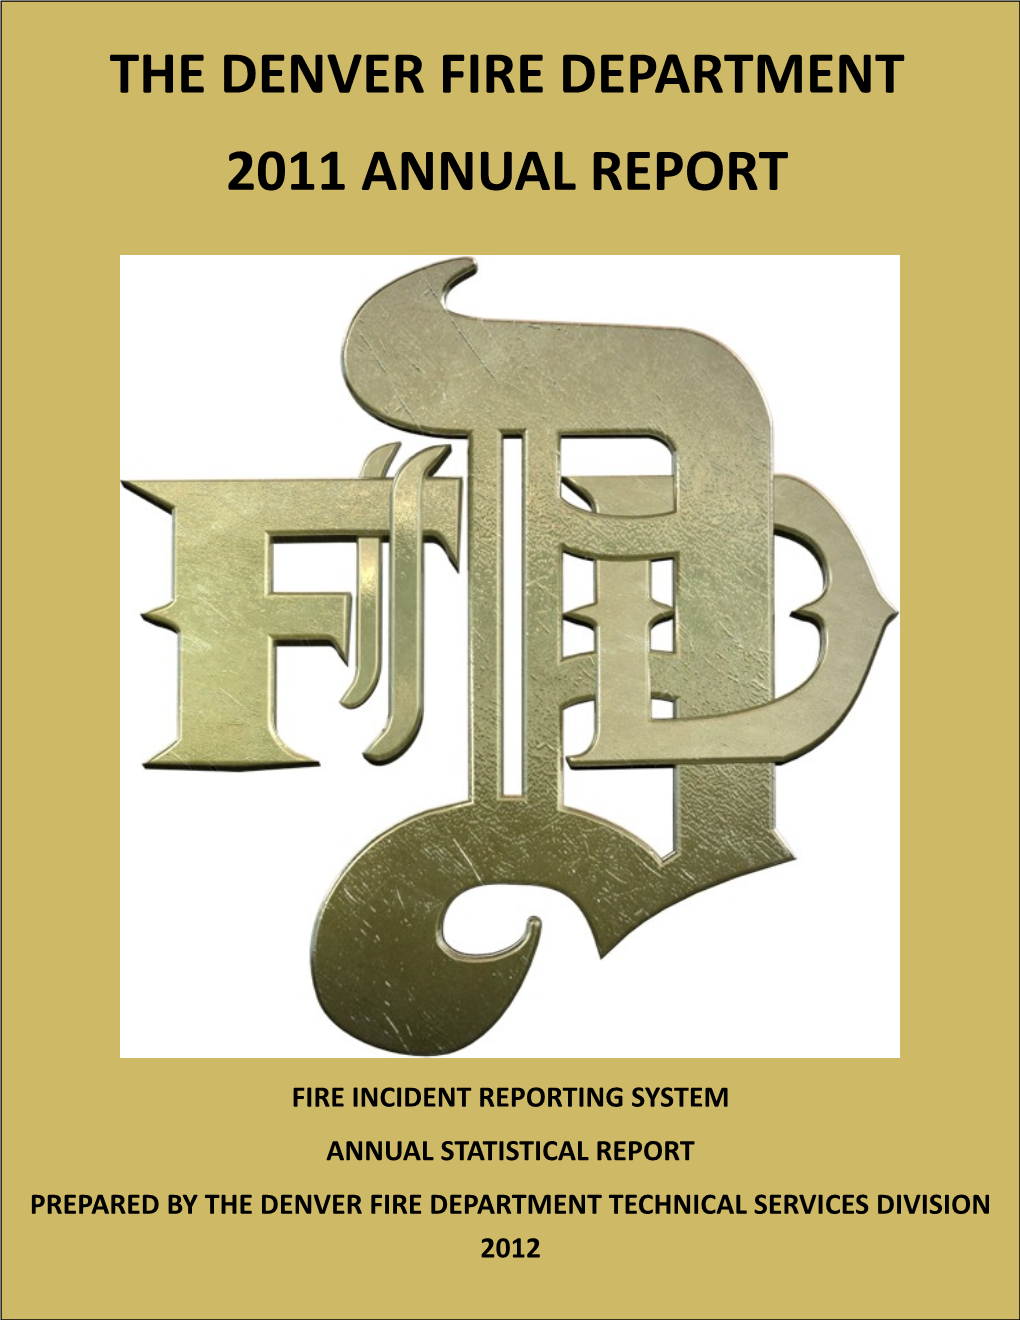 The Denver Fire Department 2011 Annual Report